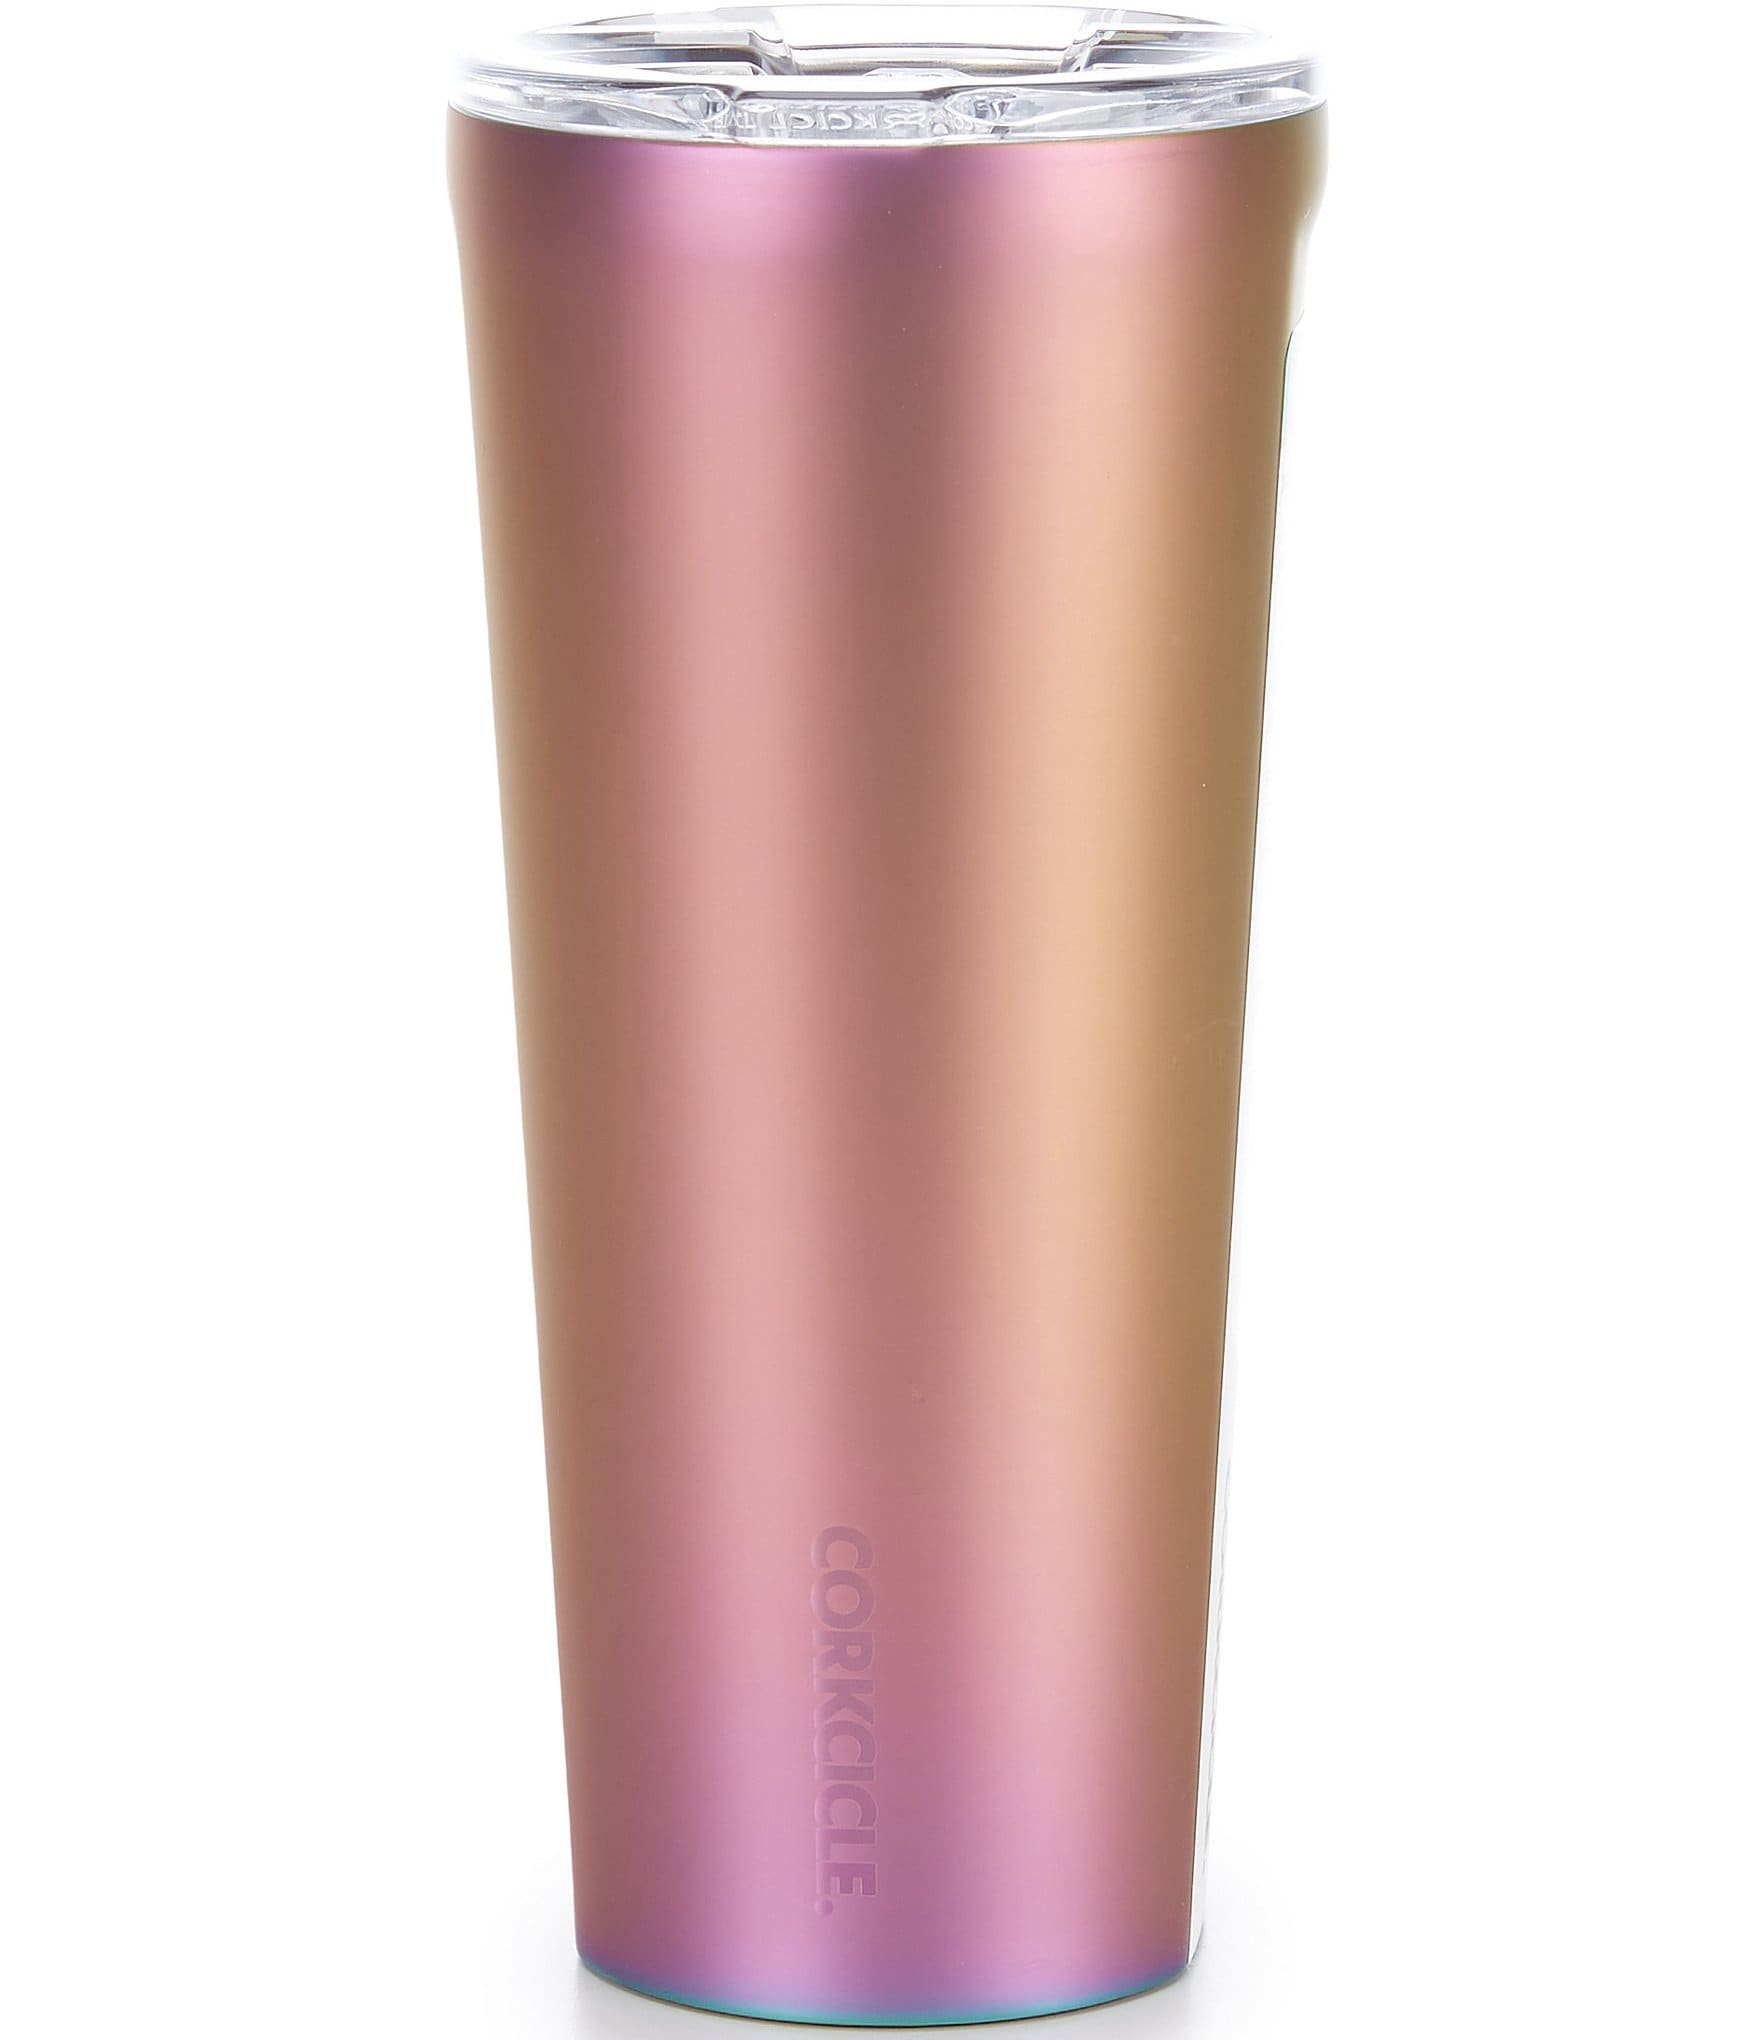 Corkcicle rose gold Tumbler – Sycamore Grove